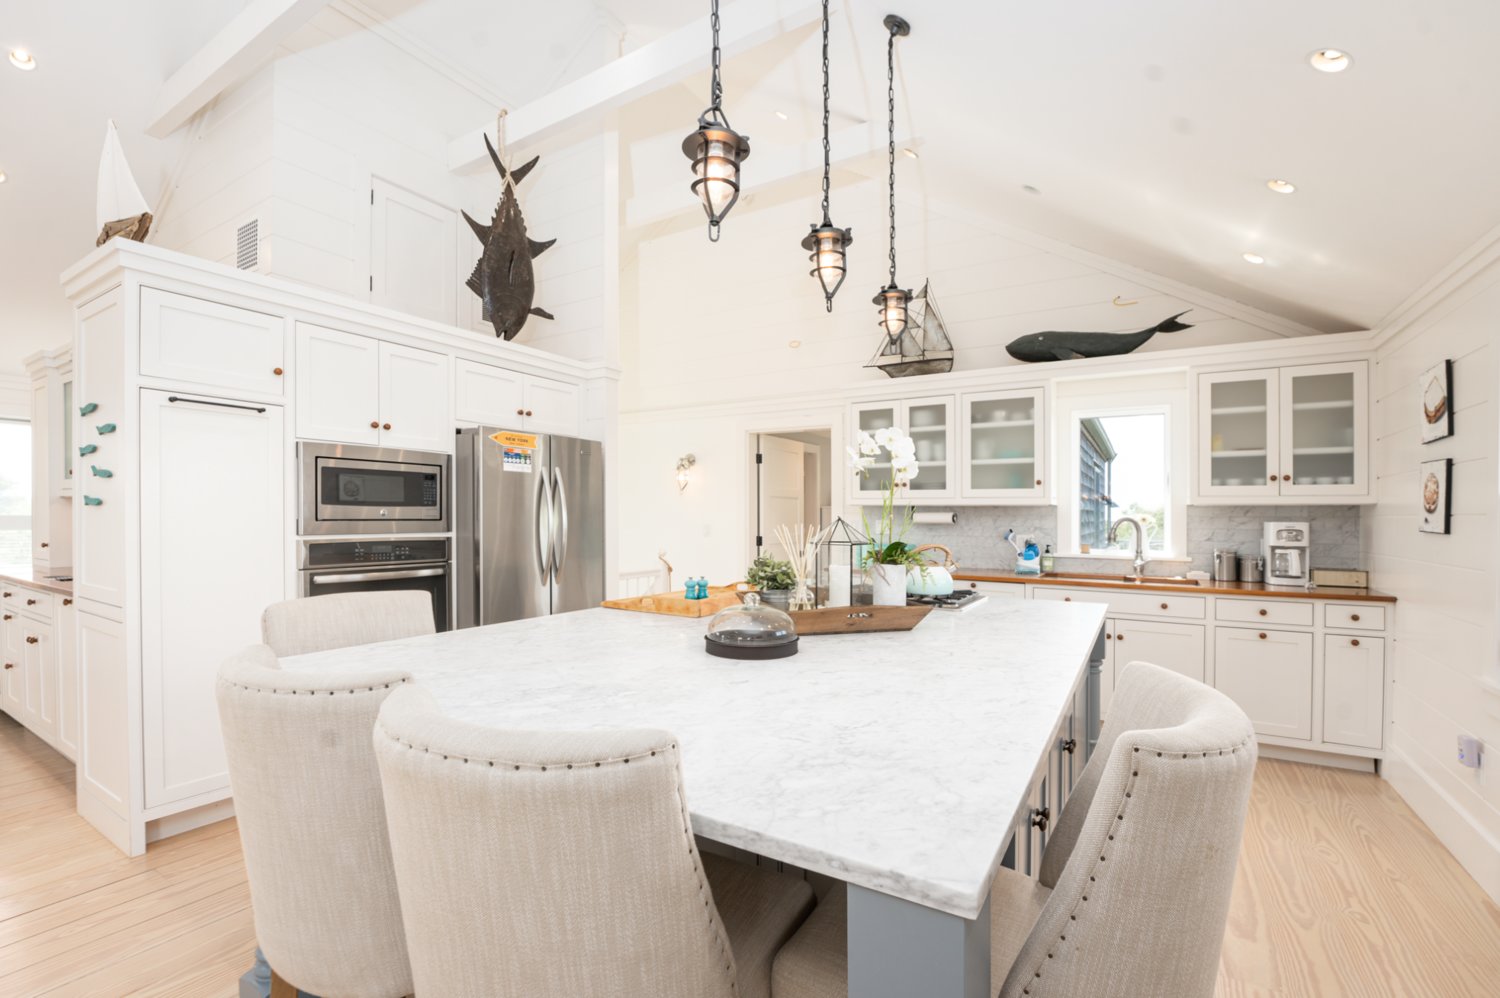 The spacious second-floor gourmet kitchen has stainless-steel appliances, abundant storage space and an oversized center island with seating for four.